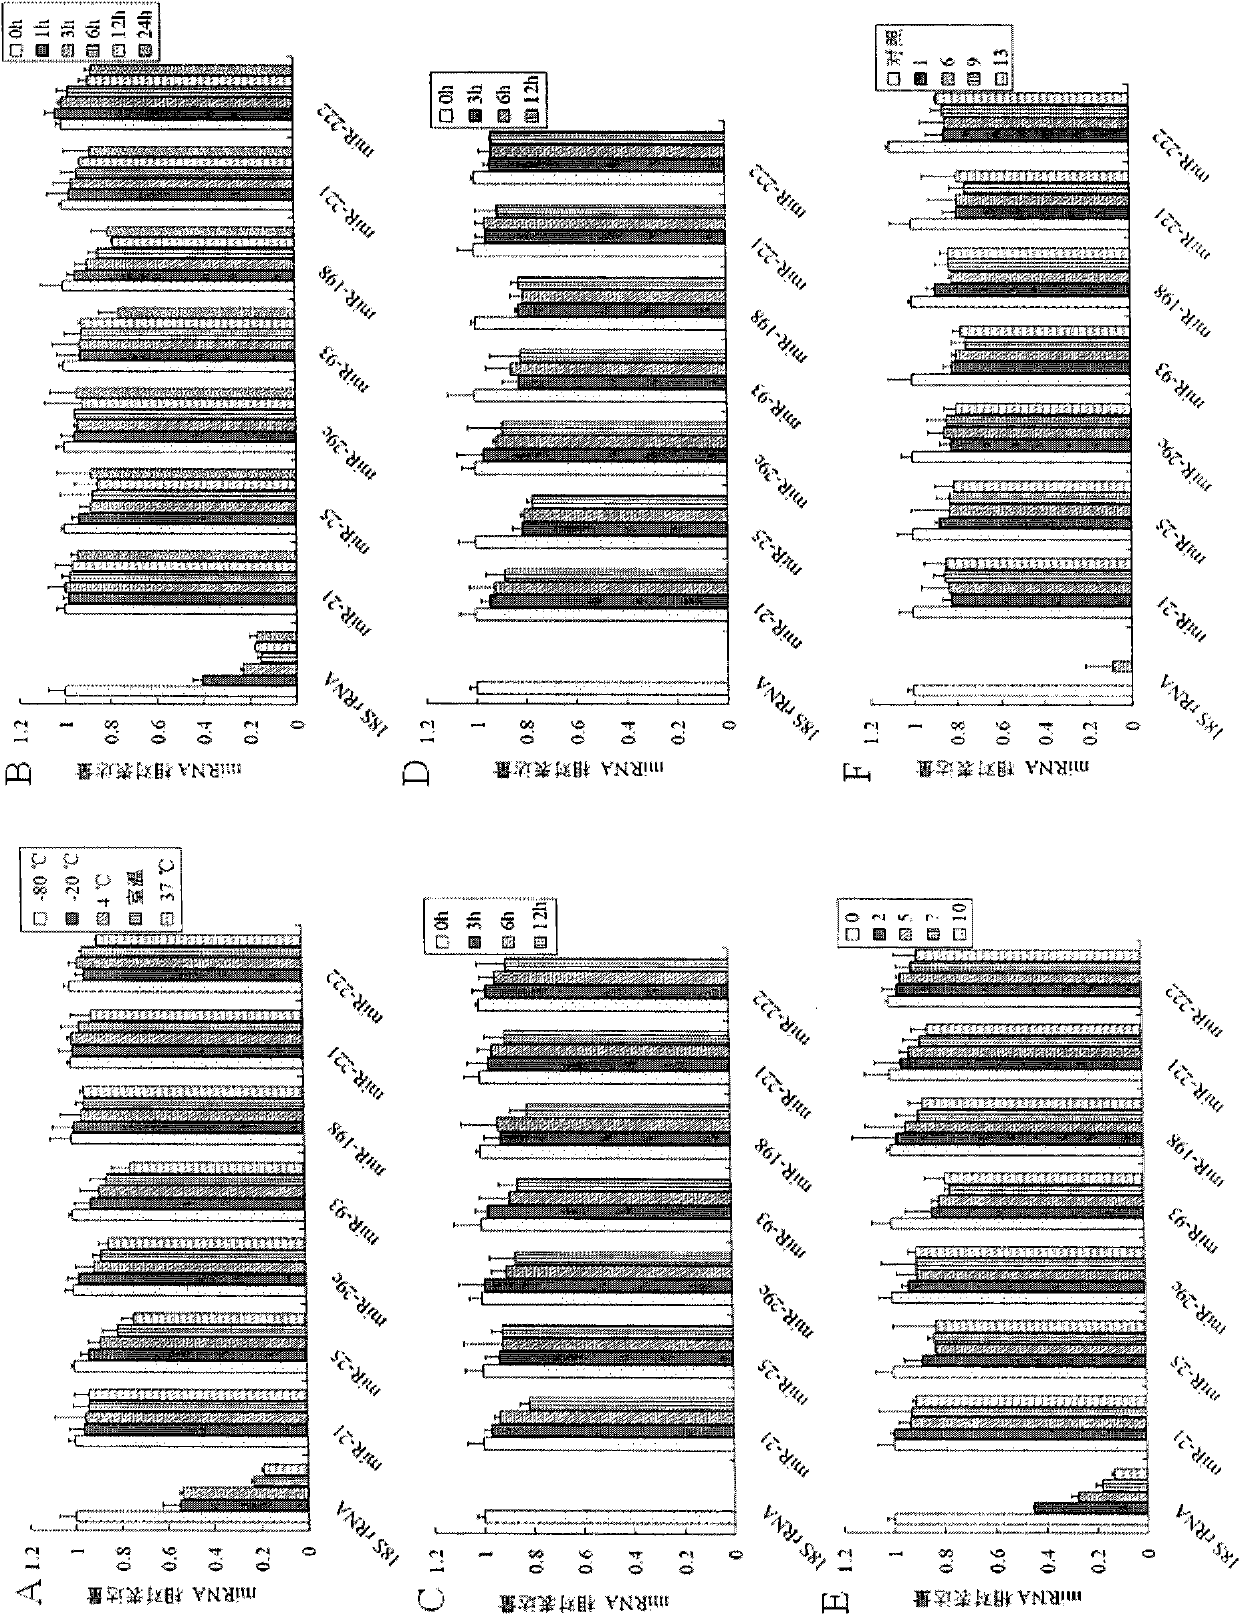 microRNA biomarker and application thereof